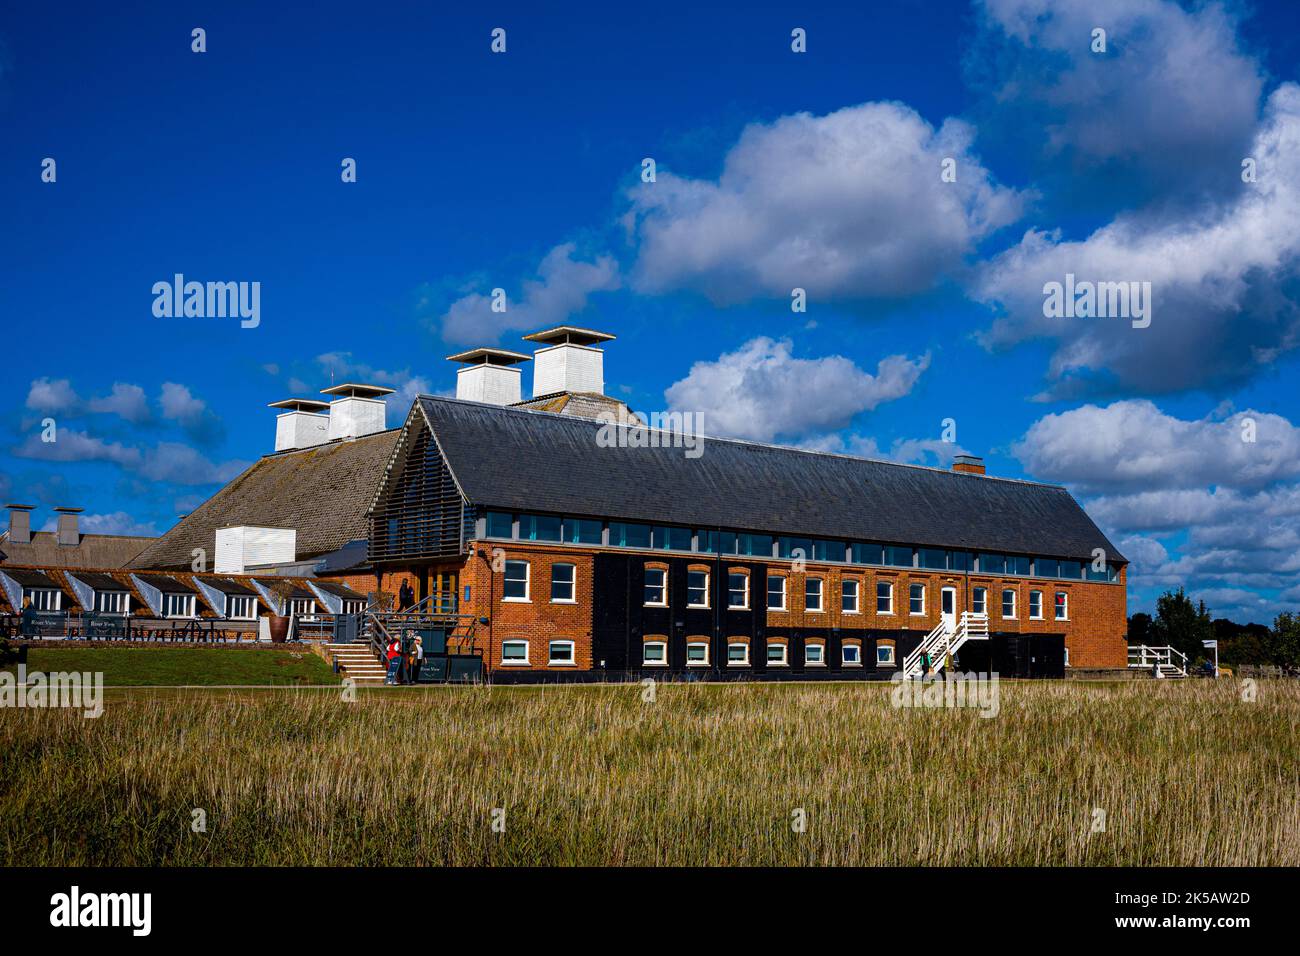 Snape Maltings Concert Hall in Snape Suffolk UK. 19th Century Maltings buildings now an Arts complex. Hosts the Aldeburgh Music Festival. Stock Photo